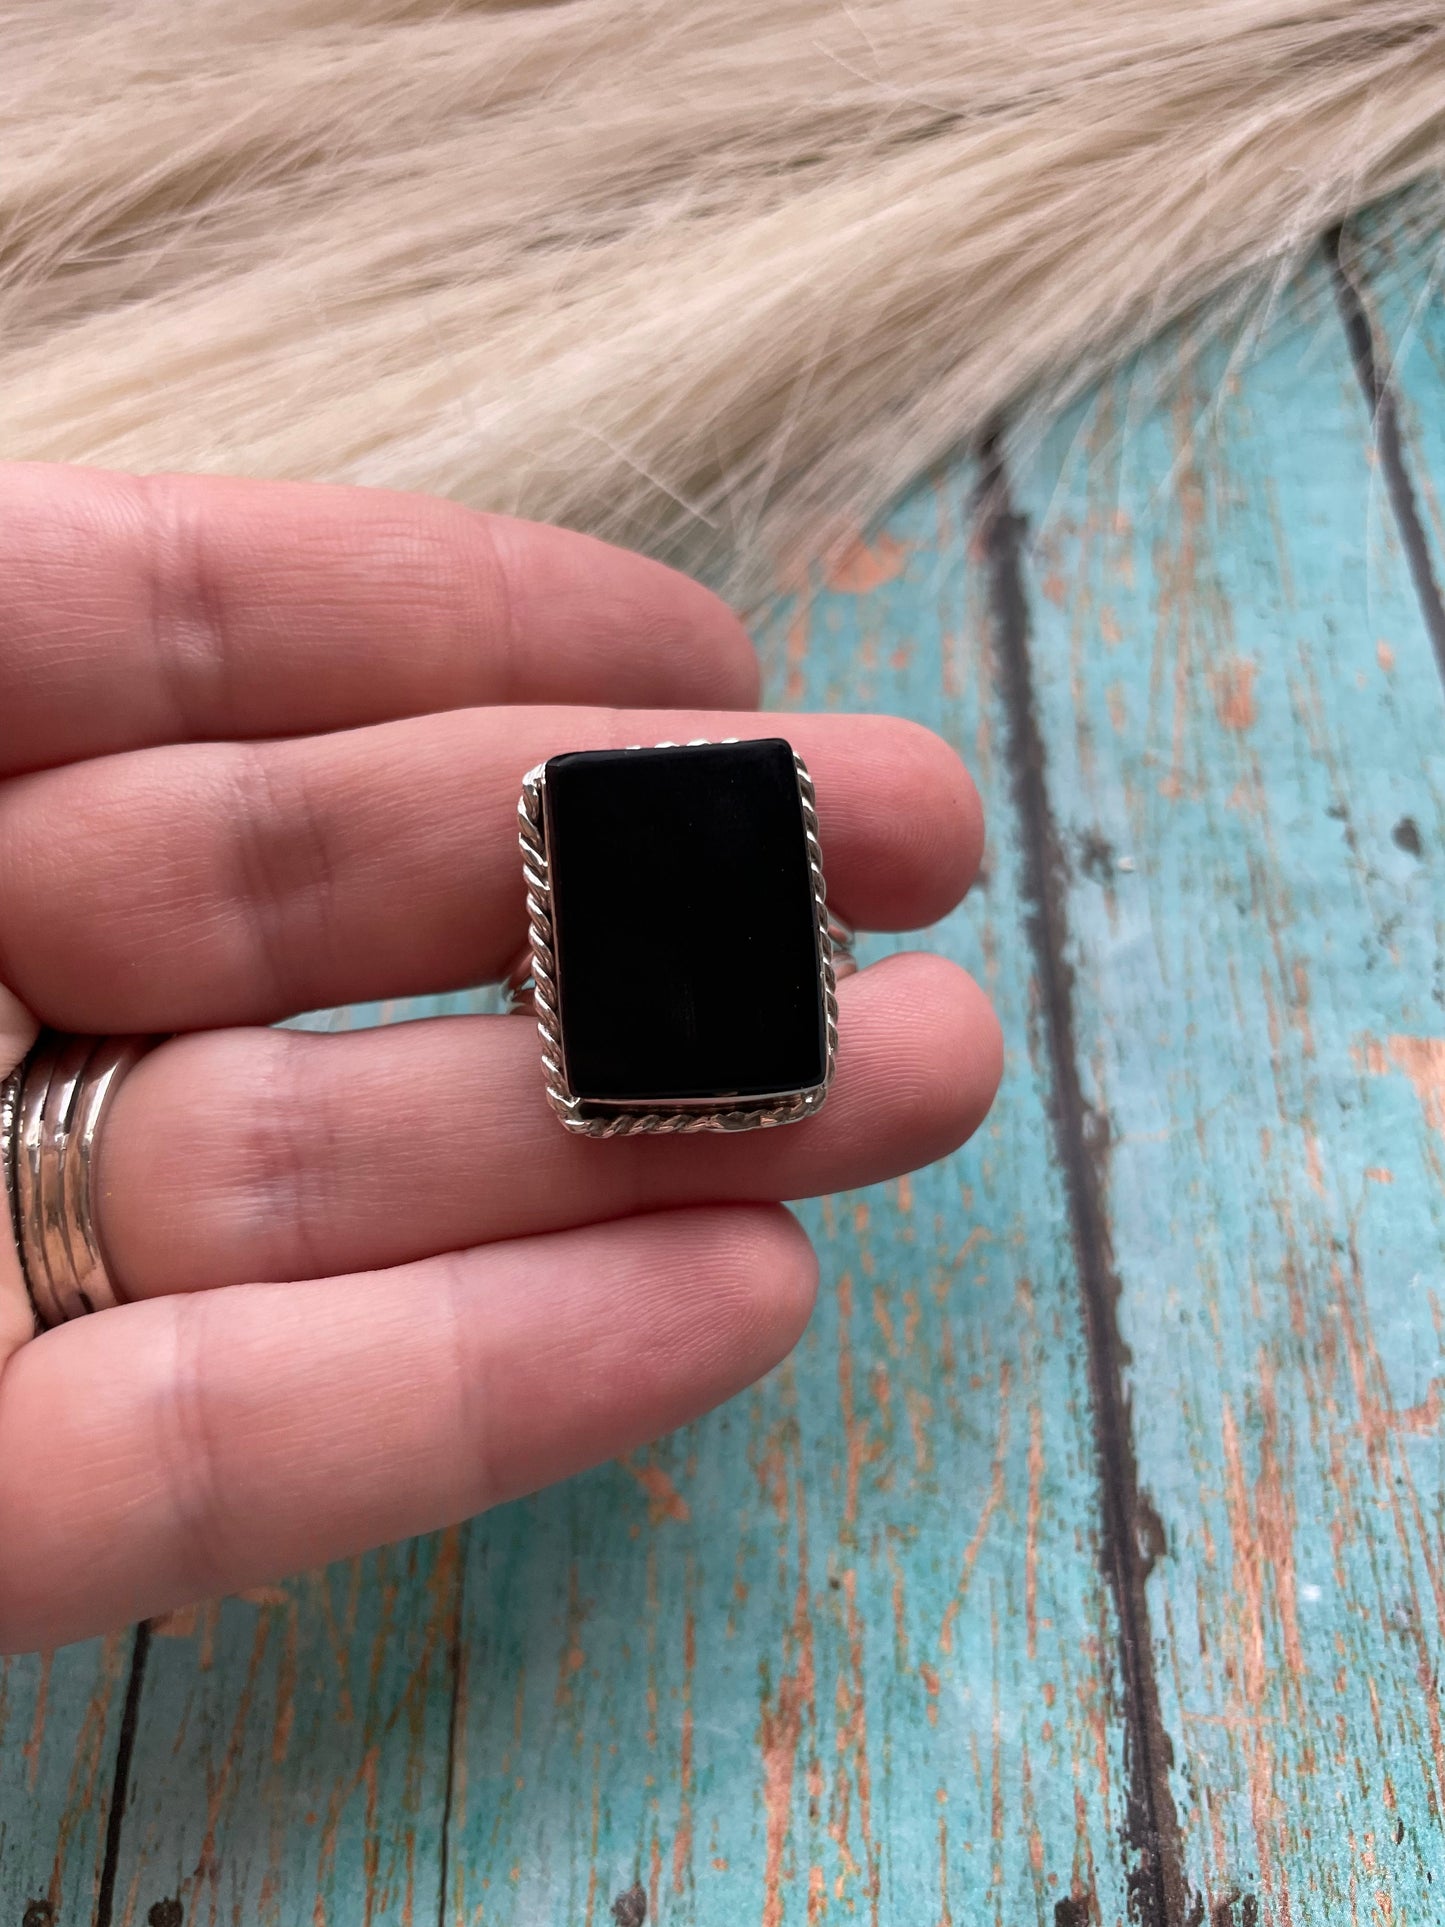 Navajo Sterling Silver Black Onyx Ring Signed Size 13